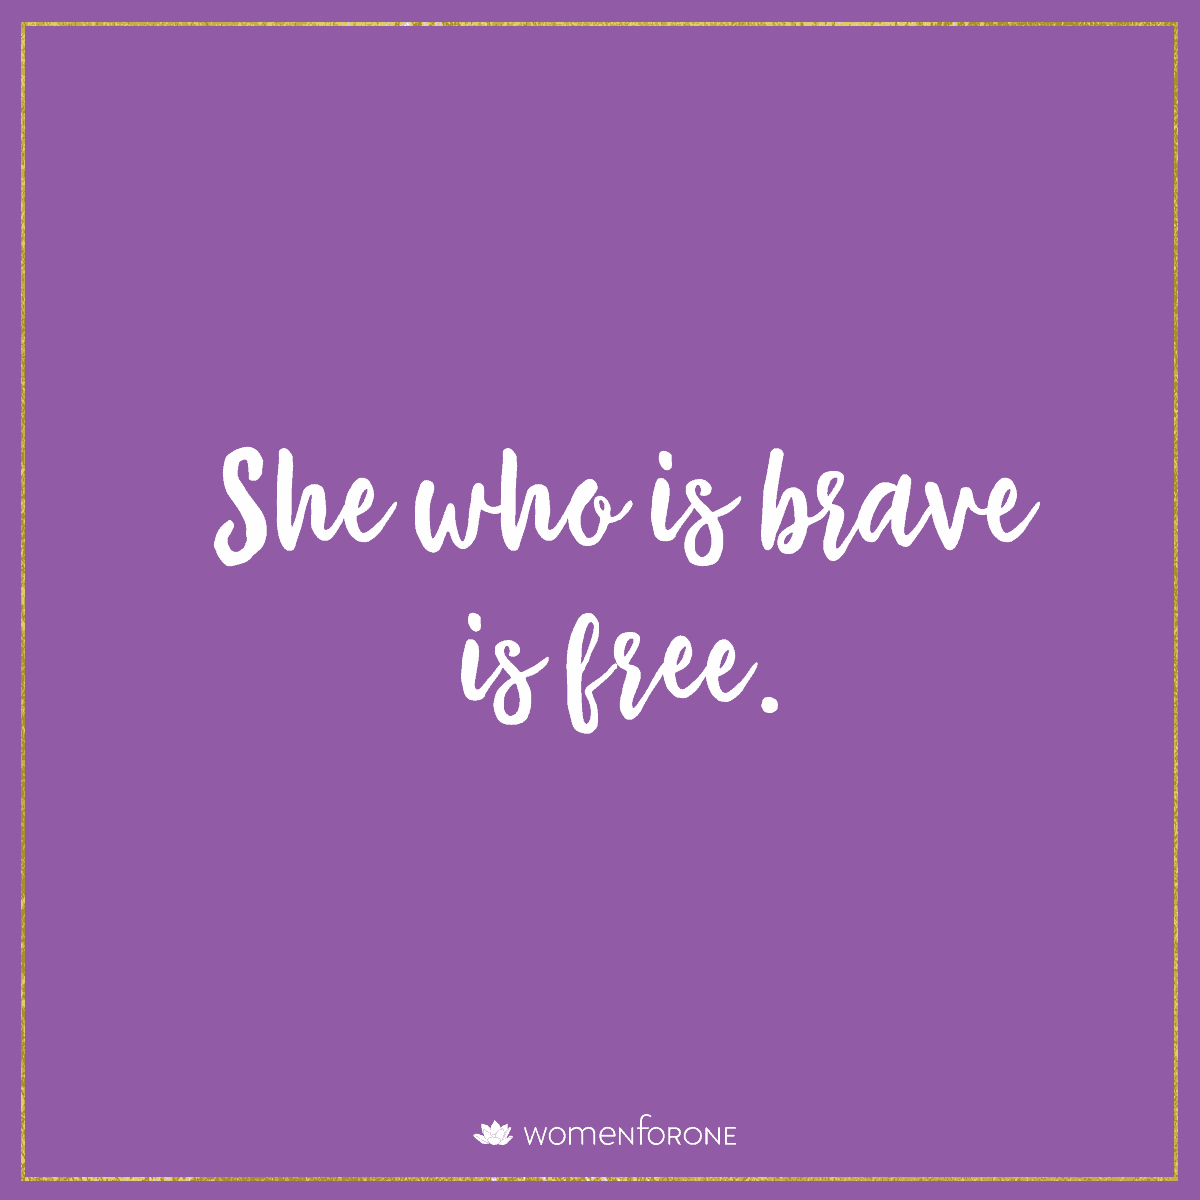 She who is brave is free